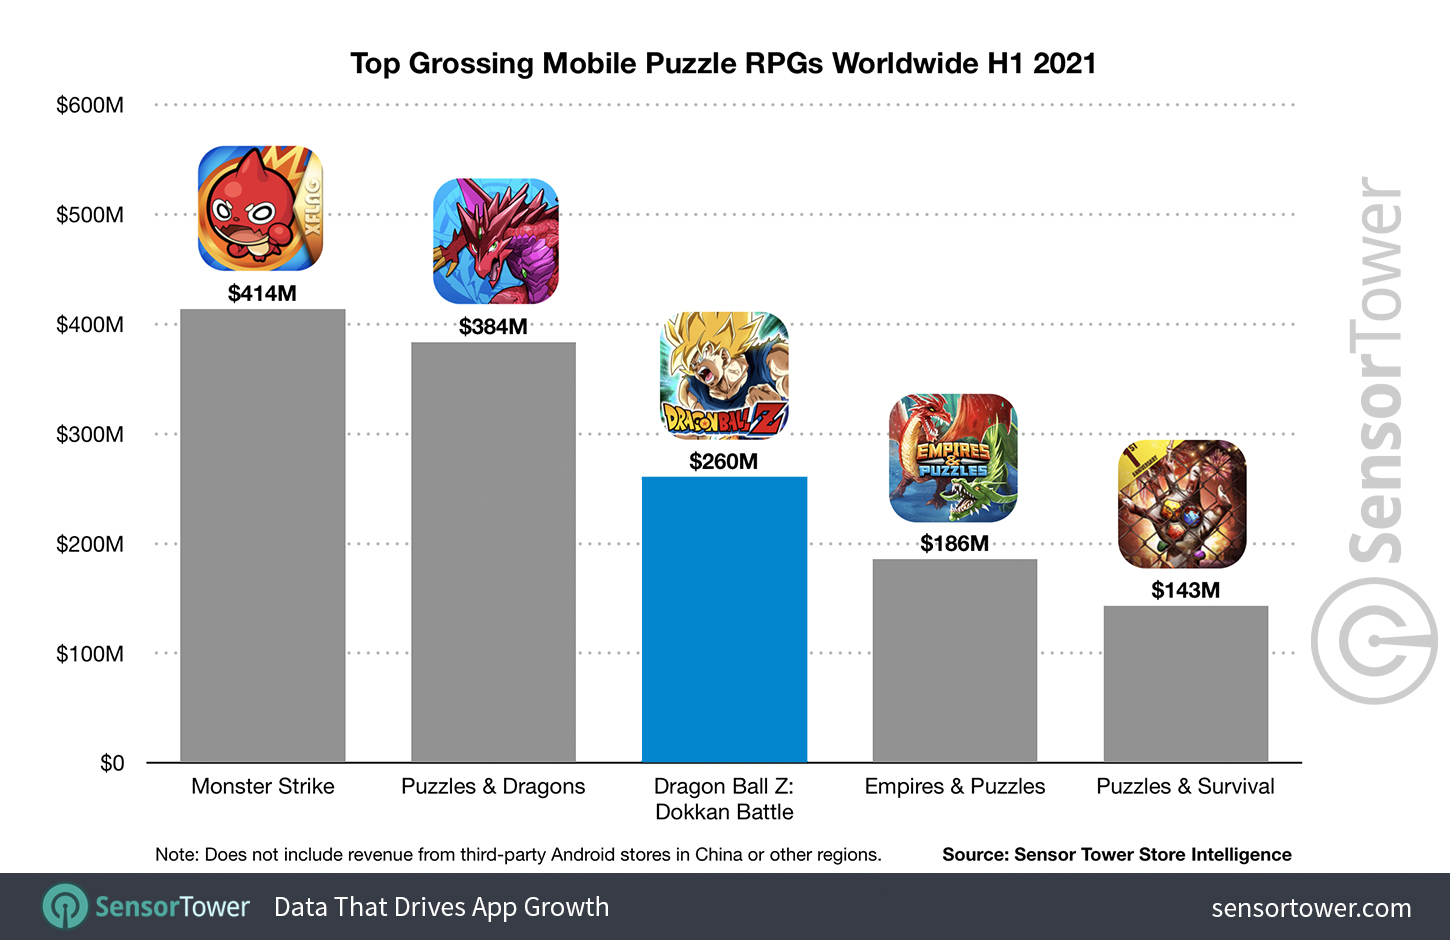 Top Grossing Mobile Puzzle RPGs Worldwide H1 2021